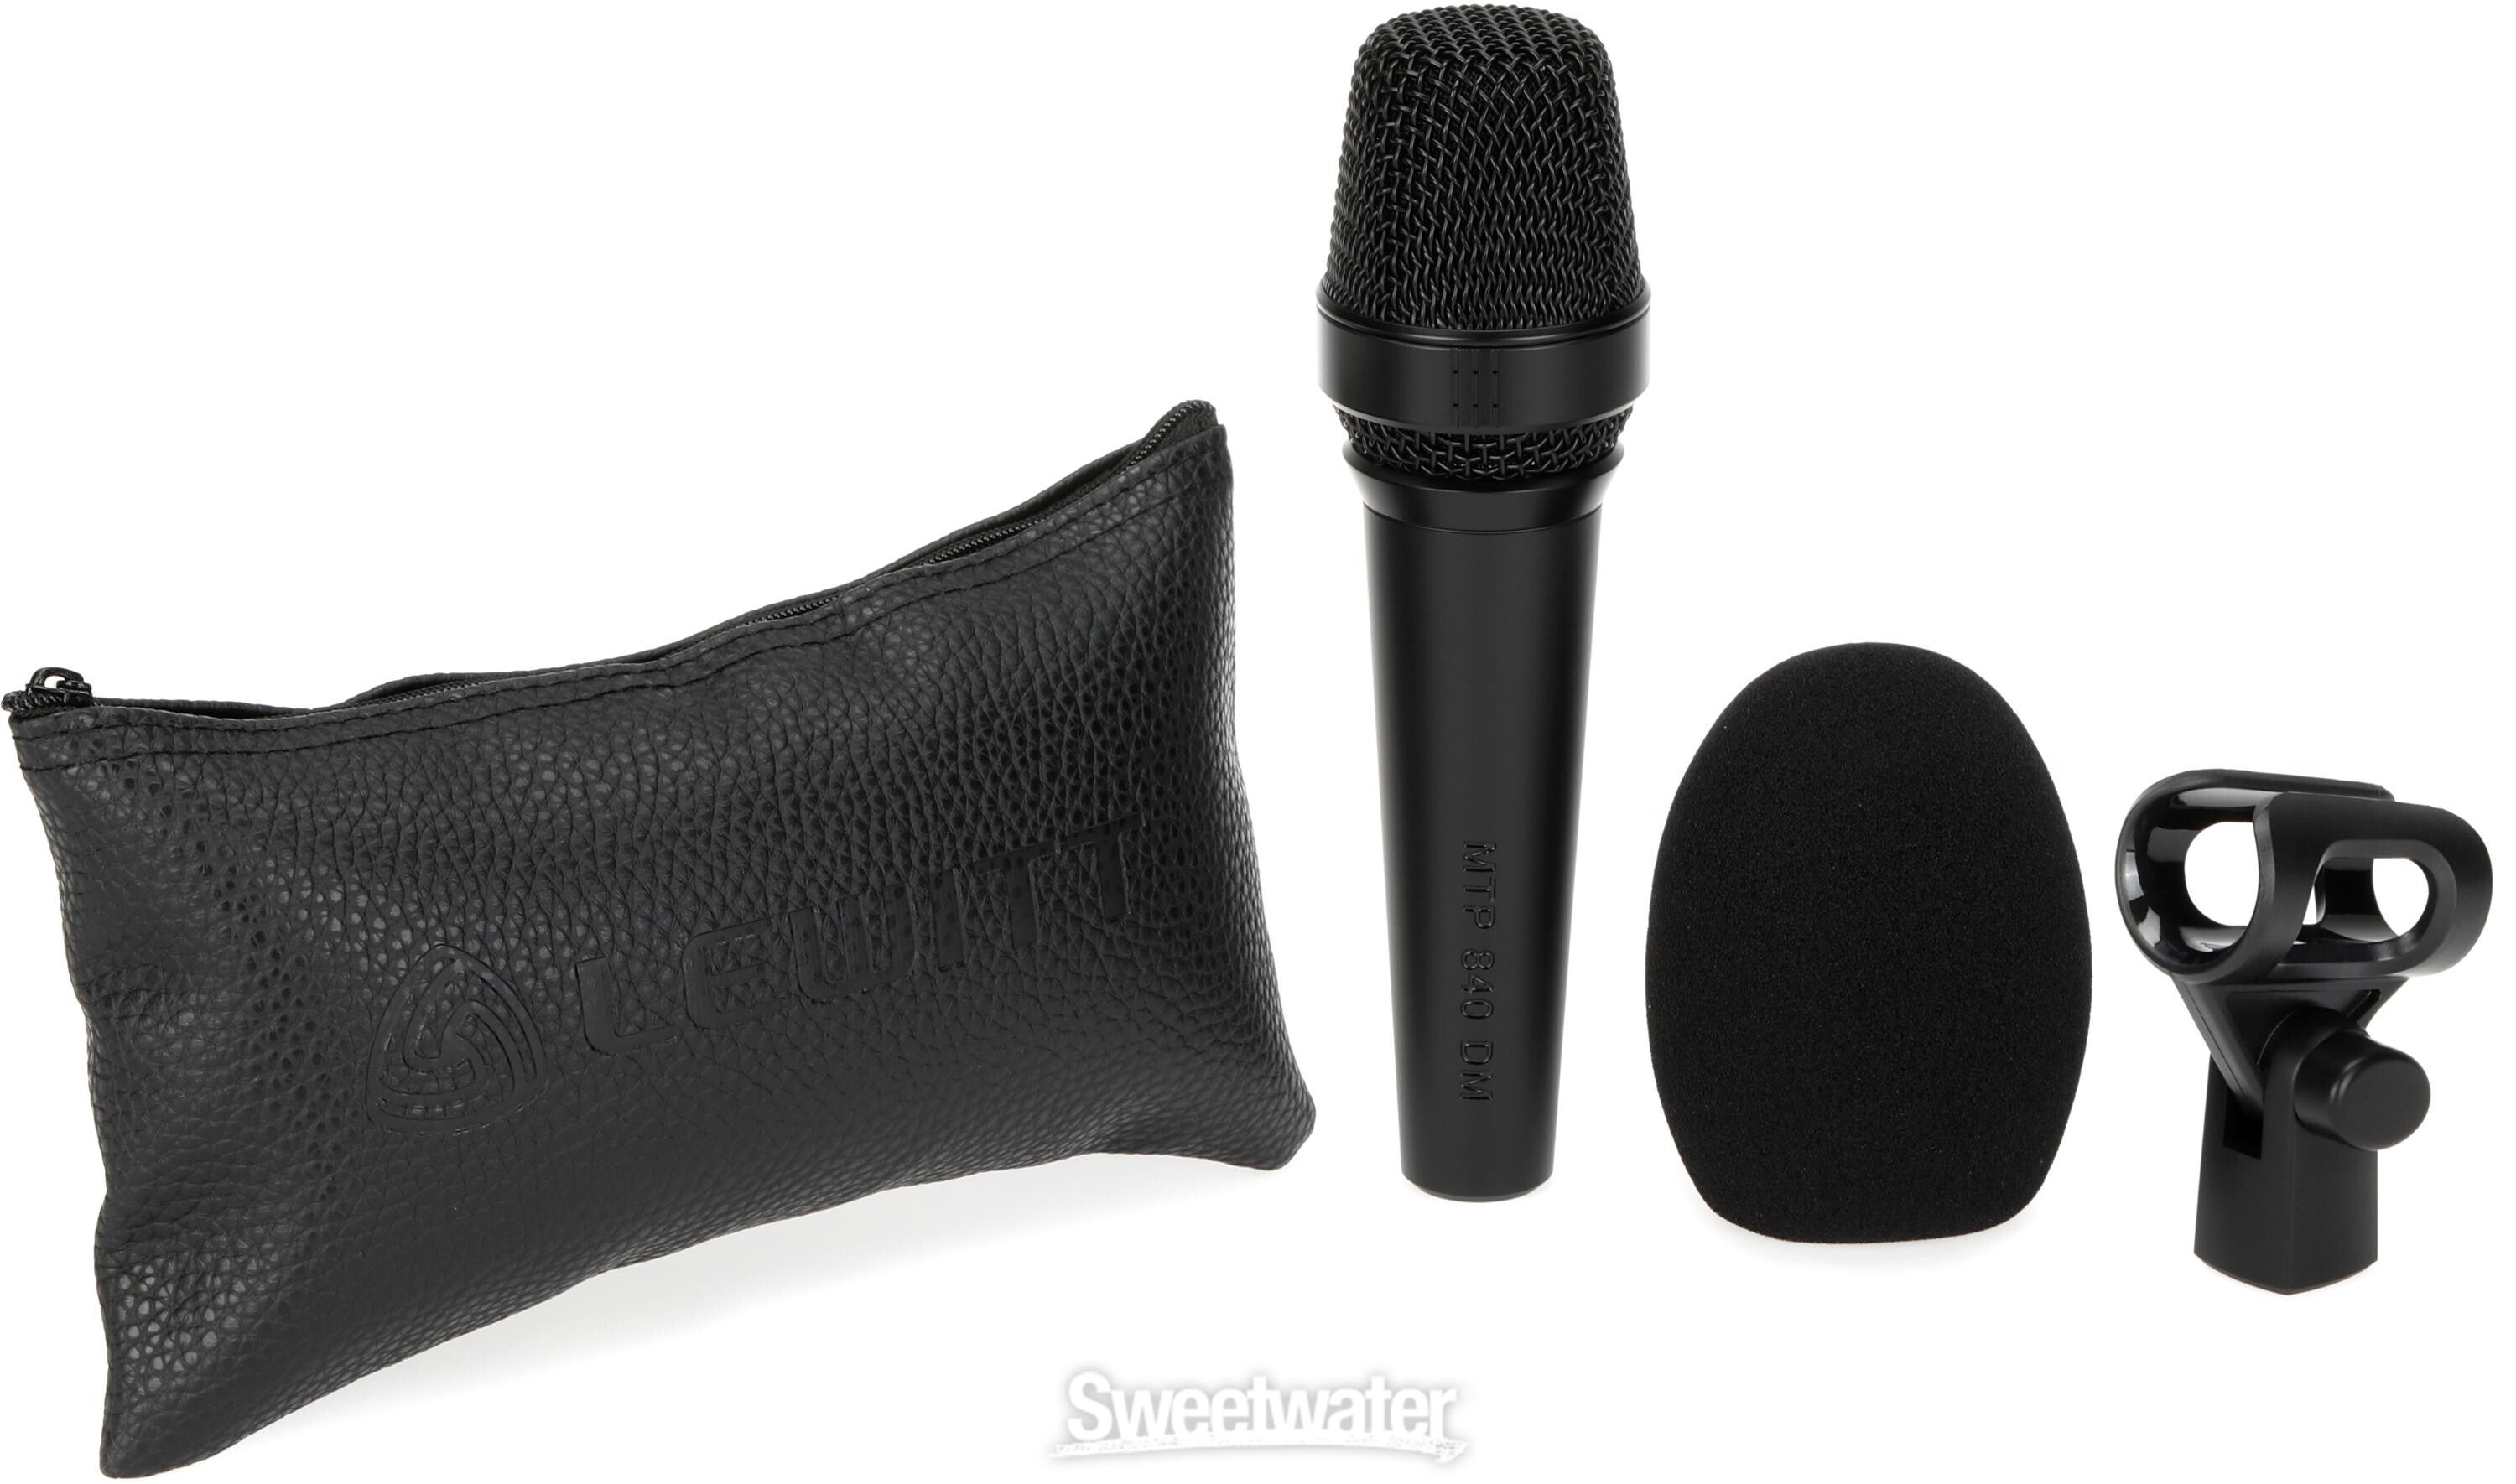 Lewitt MTP 840 DM Supercardioid Dynamic Vocal Microphone | Sweetwater